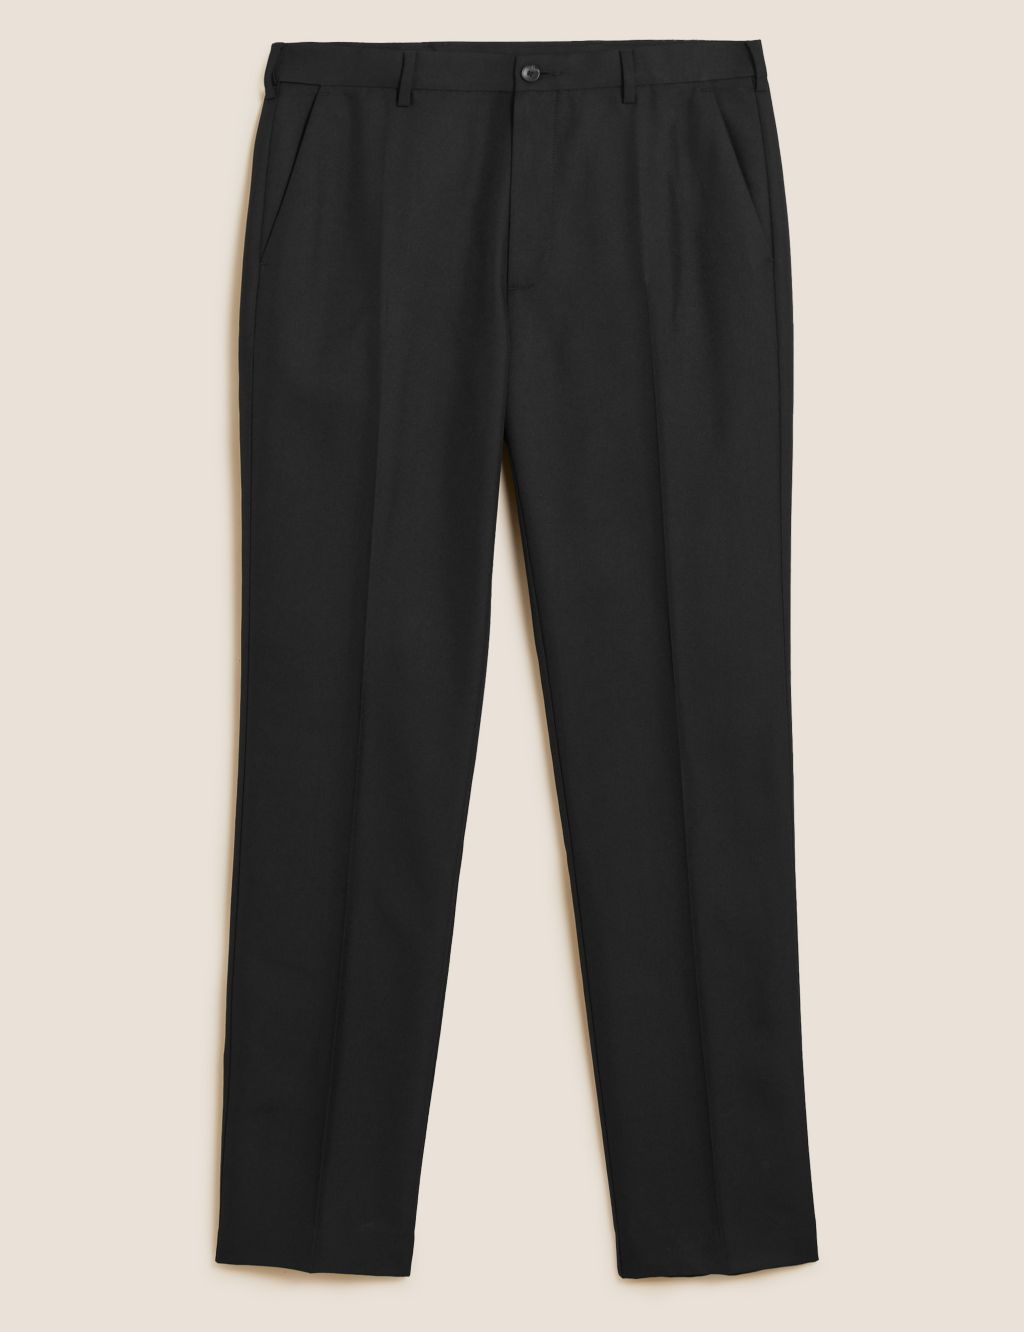 Big & Tall Regular Fit Trousers with Active Waist image 6